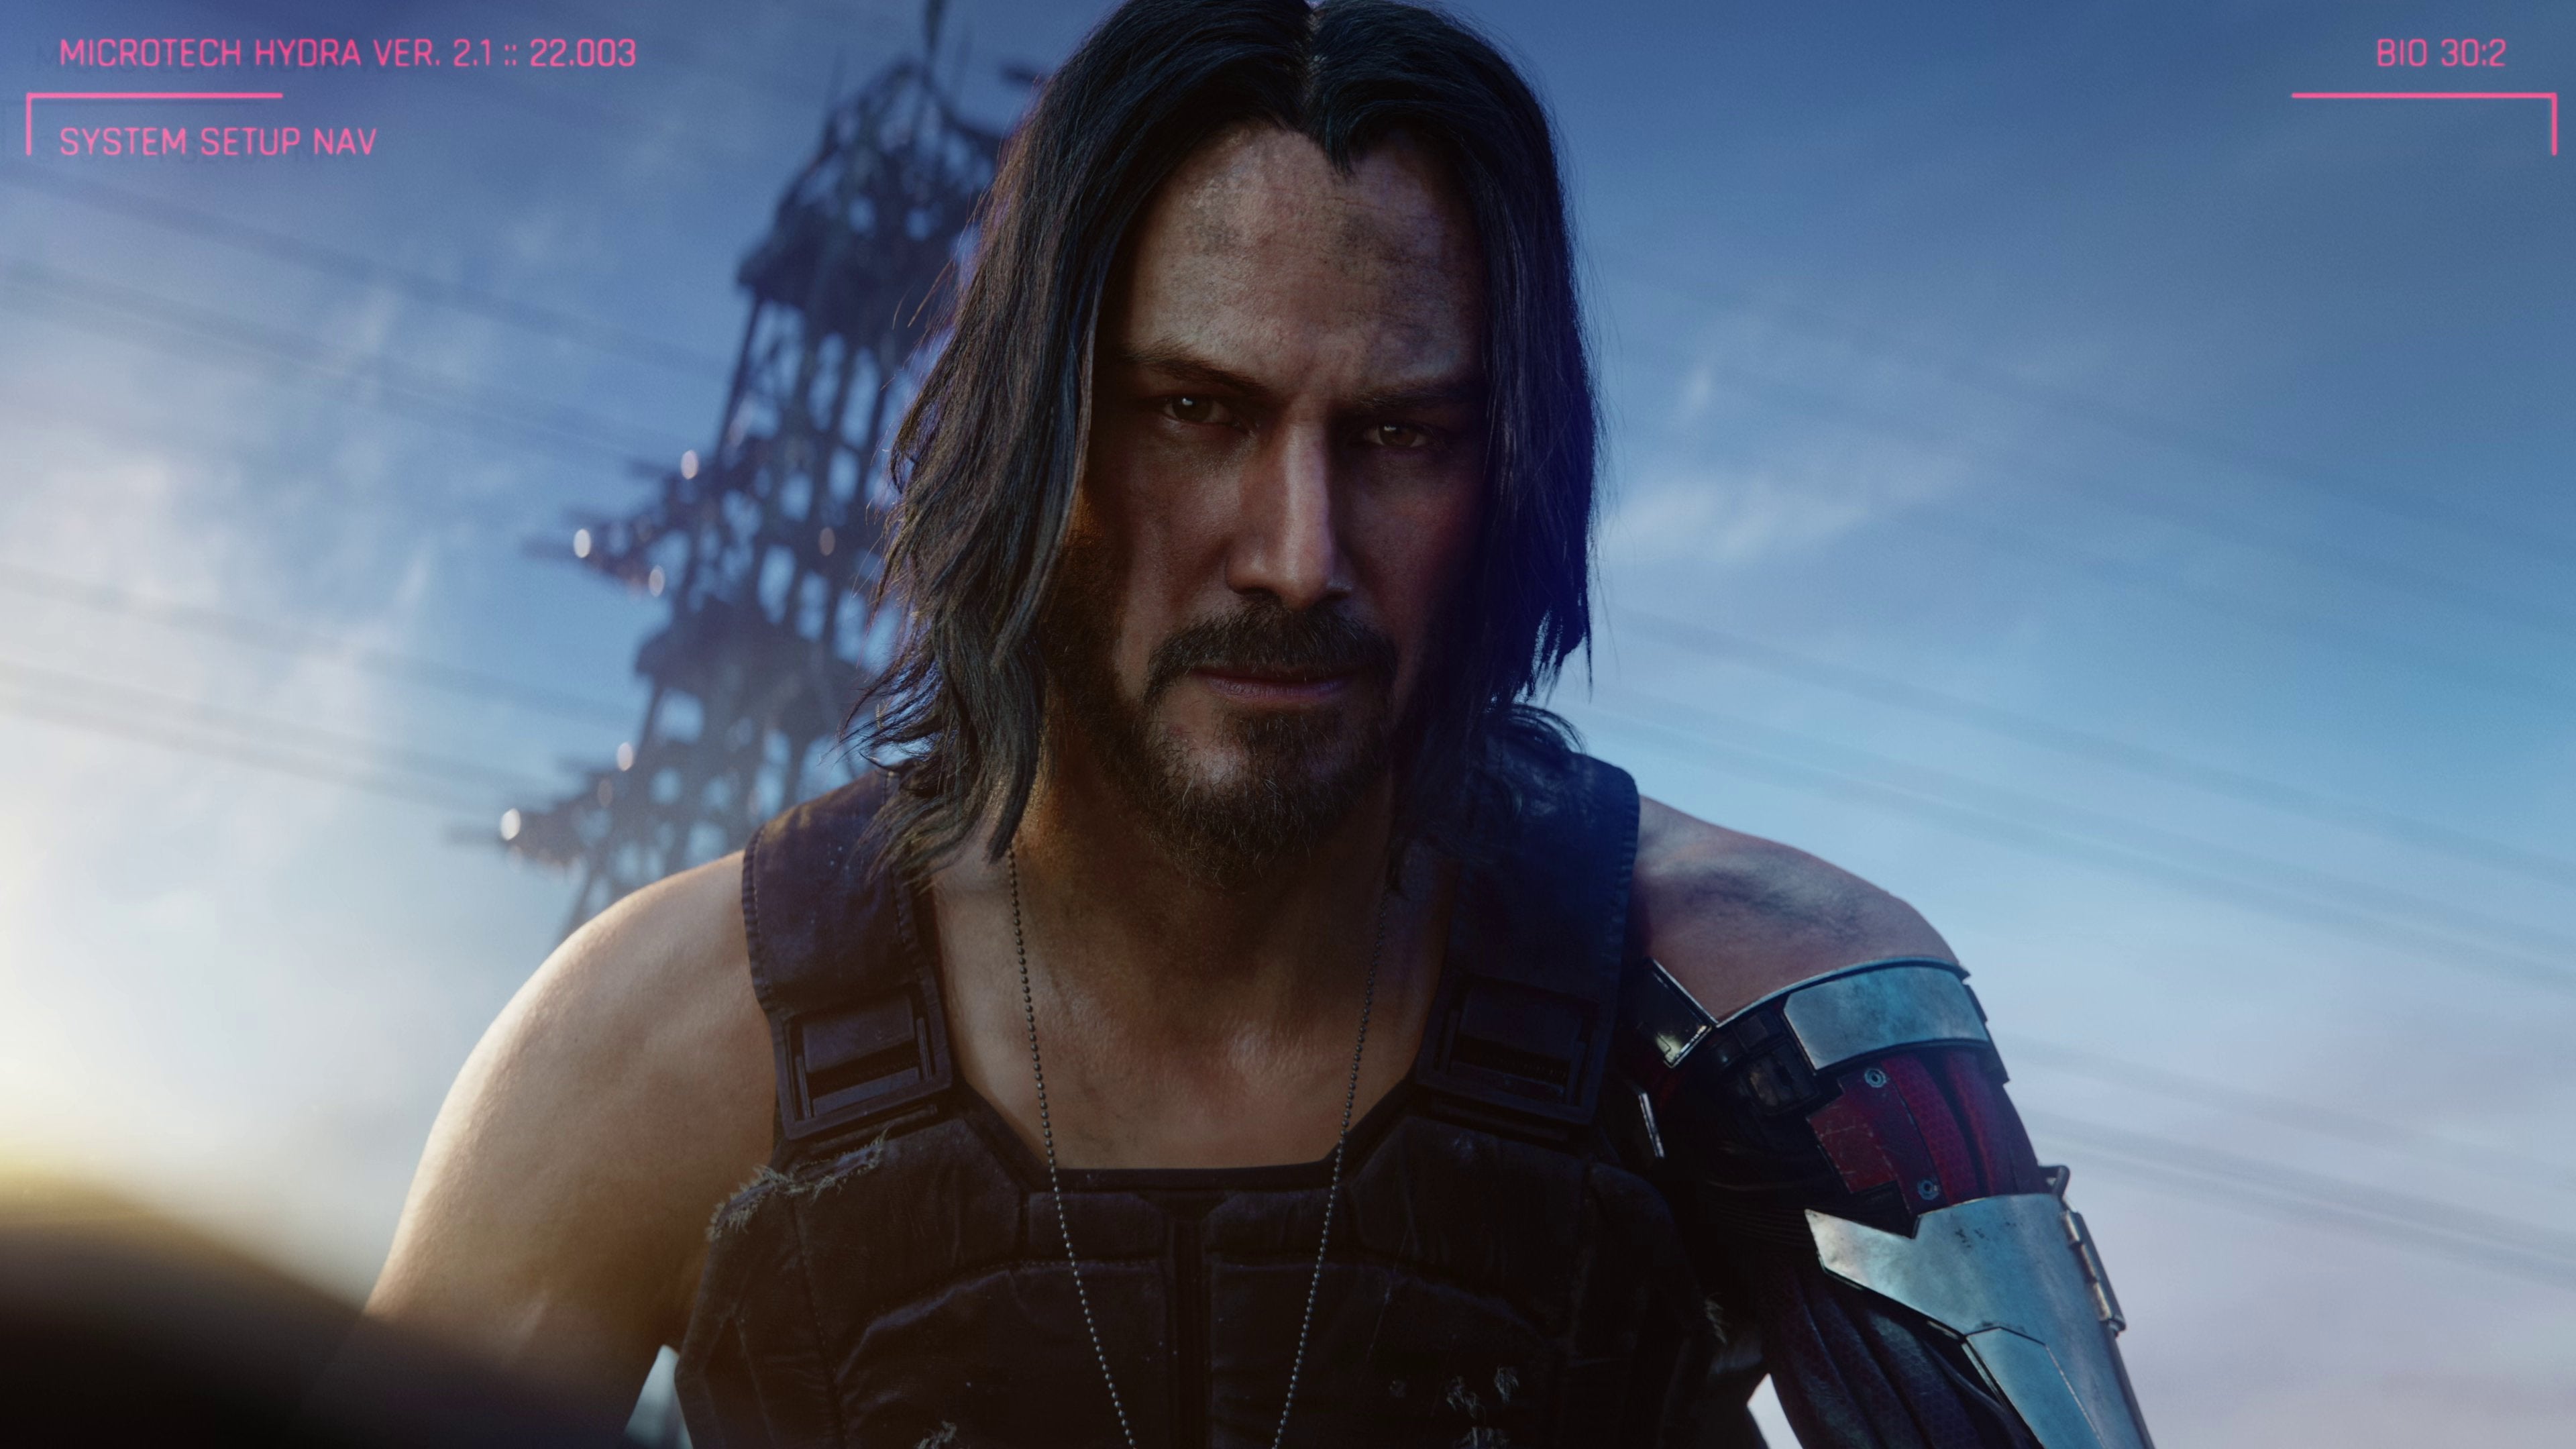 Image for You can pre-load Cyberpunk 2077 right now but if you try to play early Johnny gives you a scolding